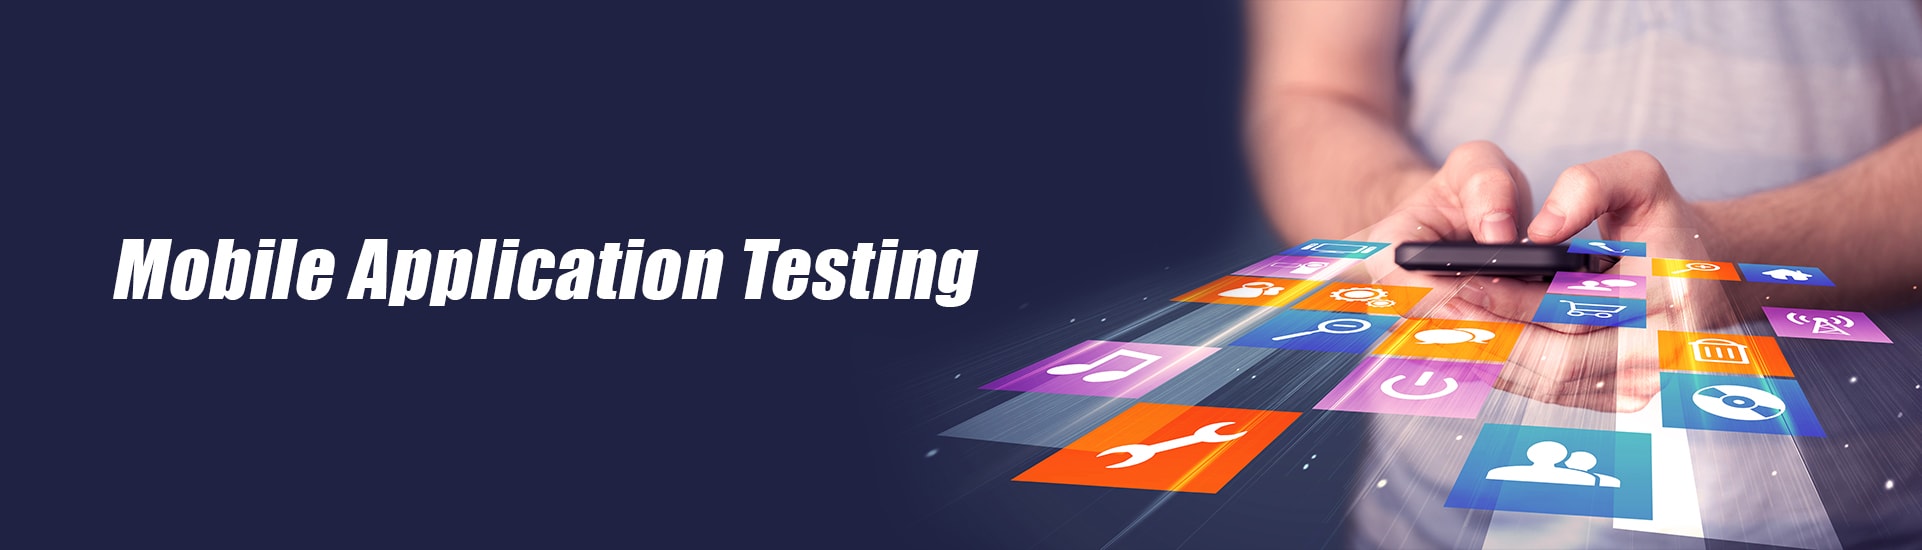 Automation Testing Solution in India and USA